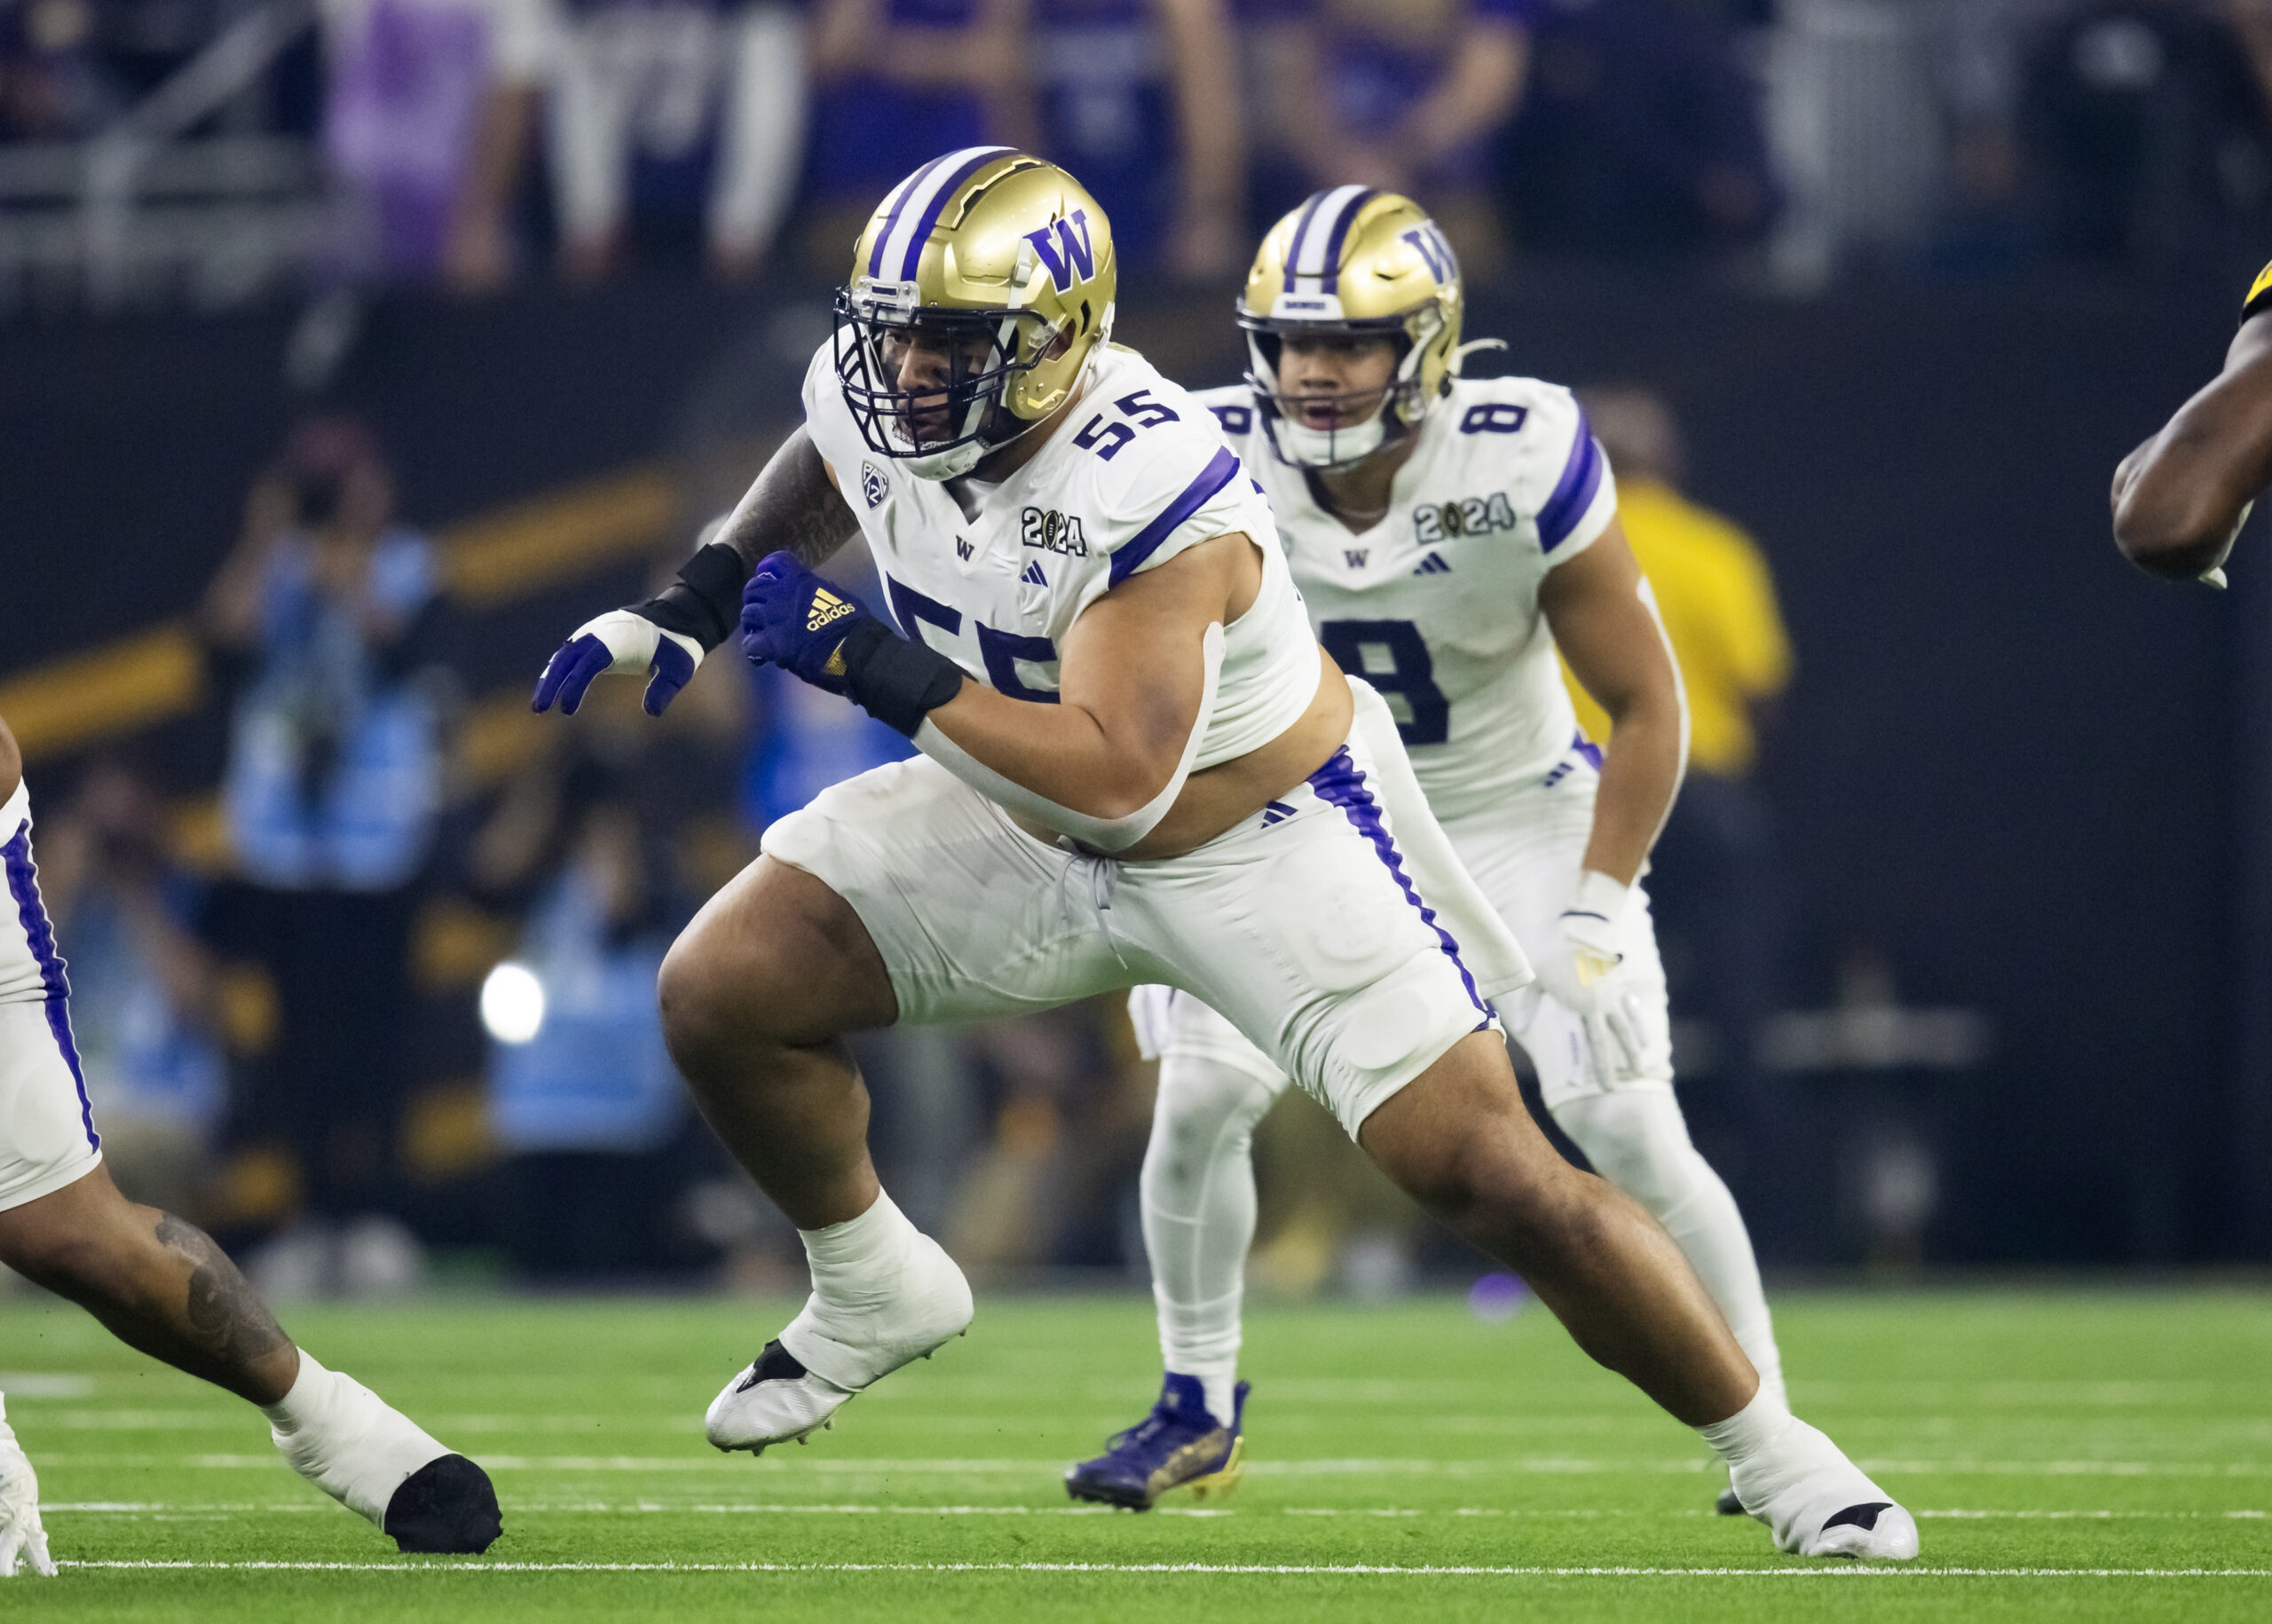 Los Angeles Chargers Insider Predicts 1st Round Trade Back in NFL Draft To Draft Offensive Lineman